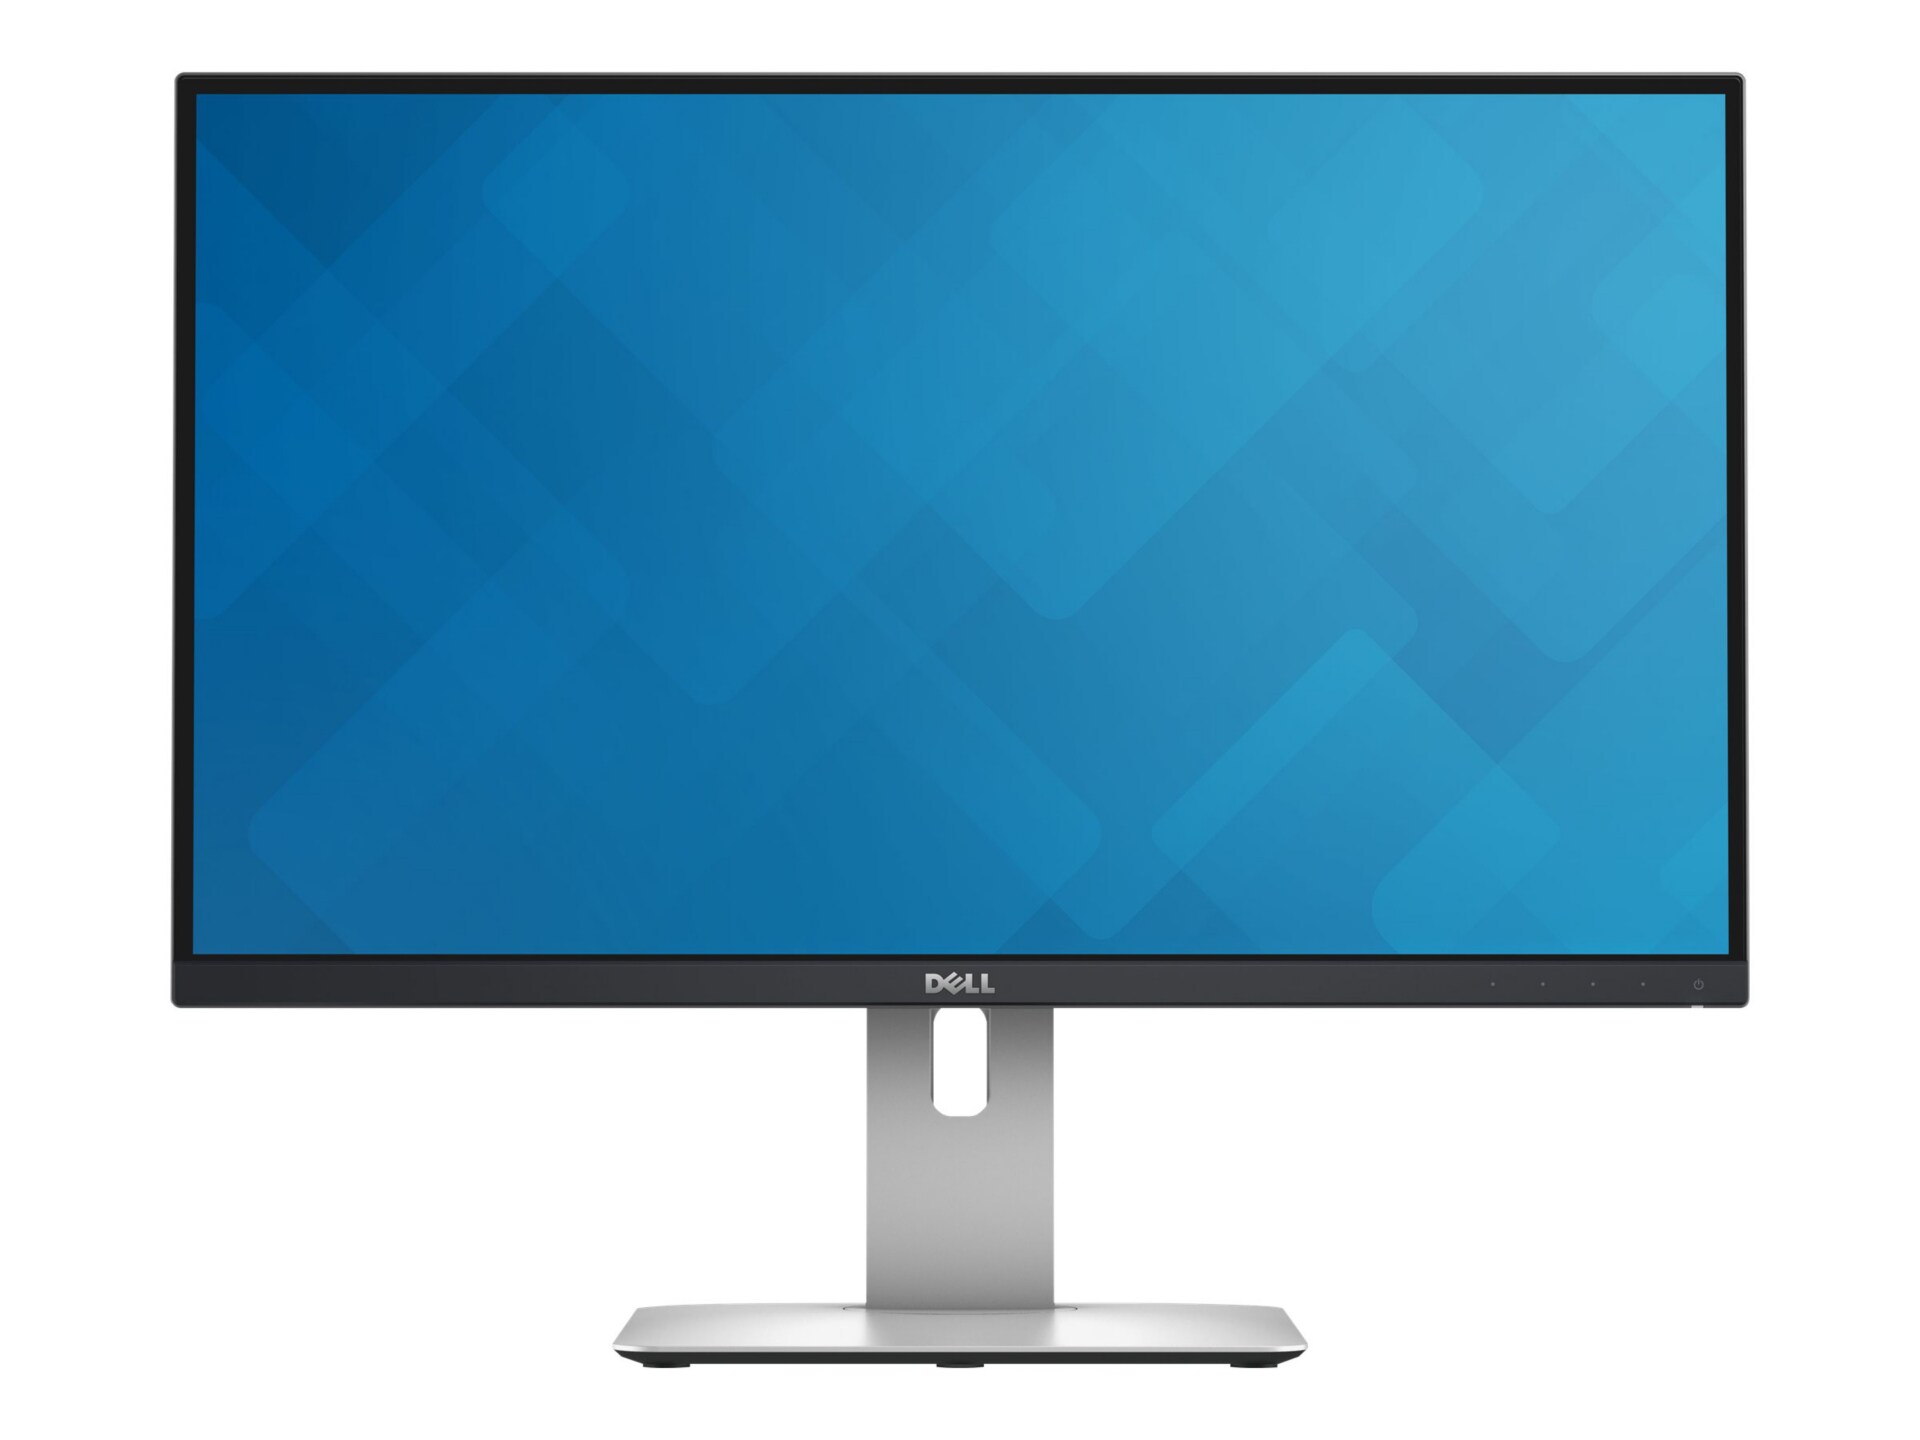 Dell UltraSharp U2515H - LED monitor - 25" - with 3-Years Advanced Exchange Service and Premium Panel Guarantee